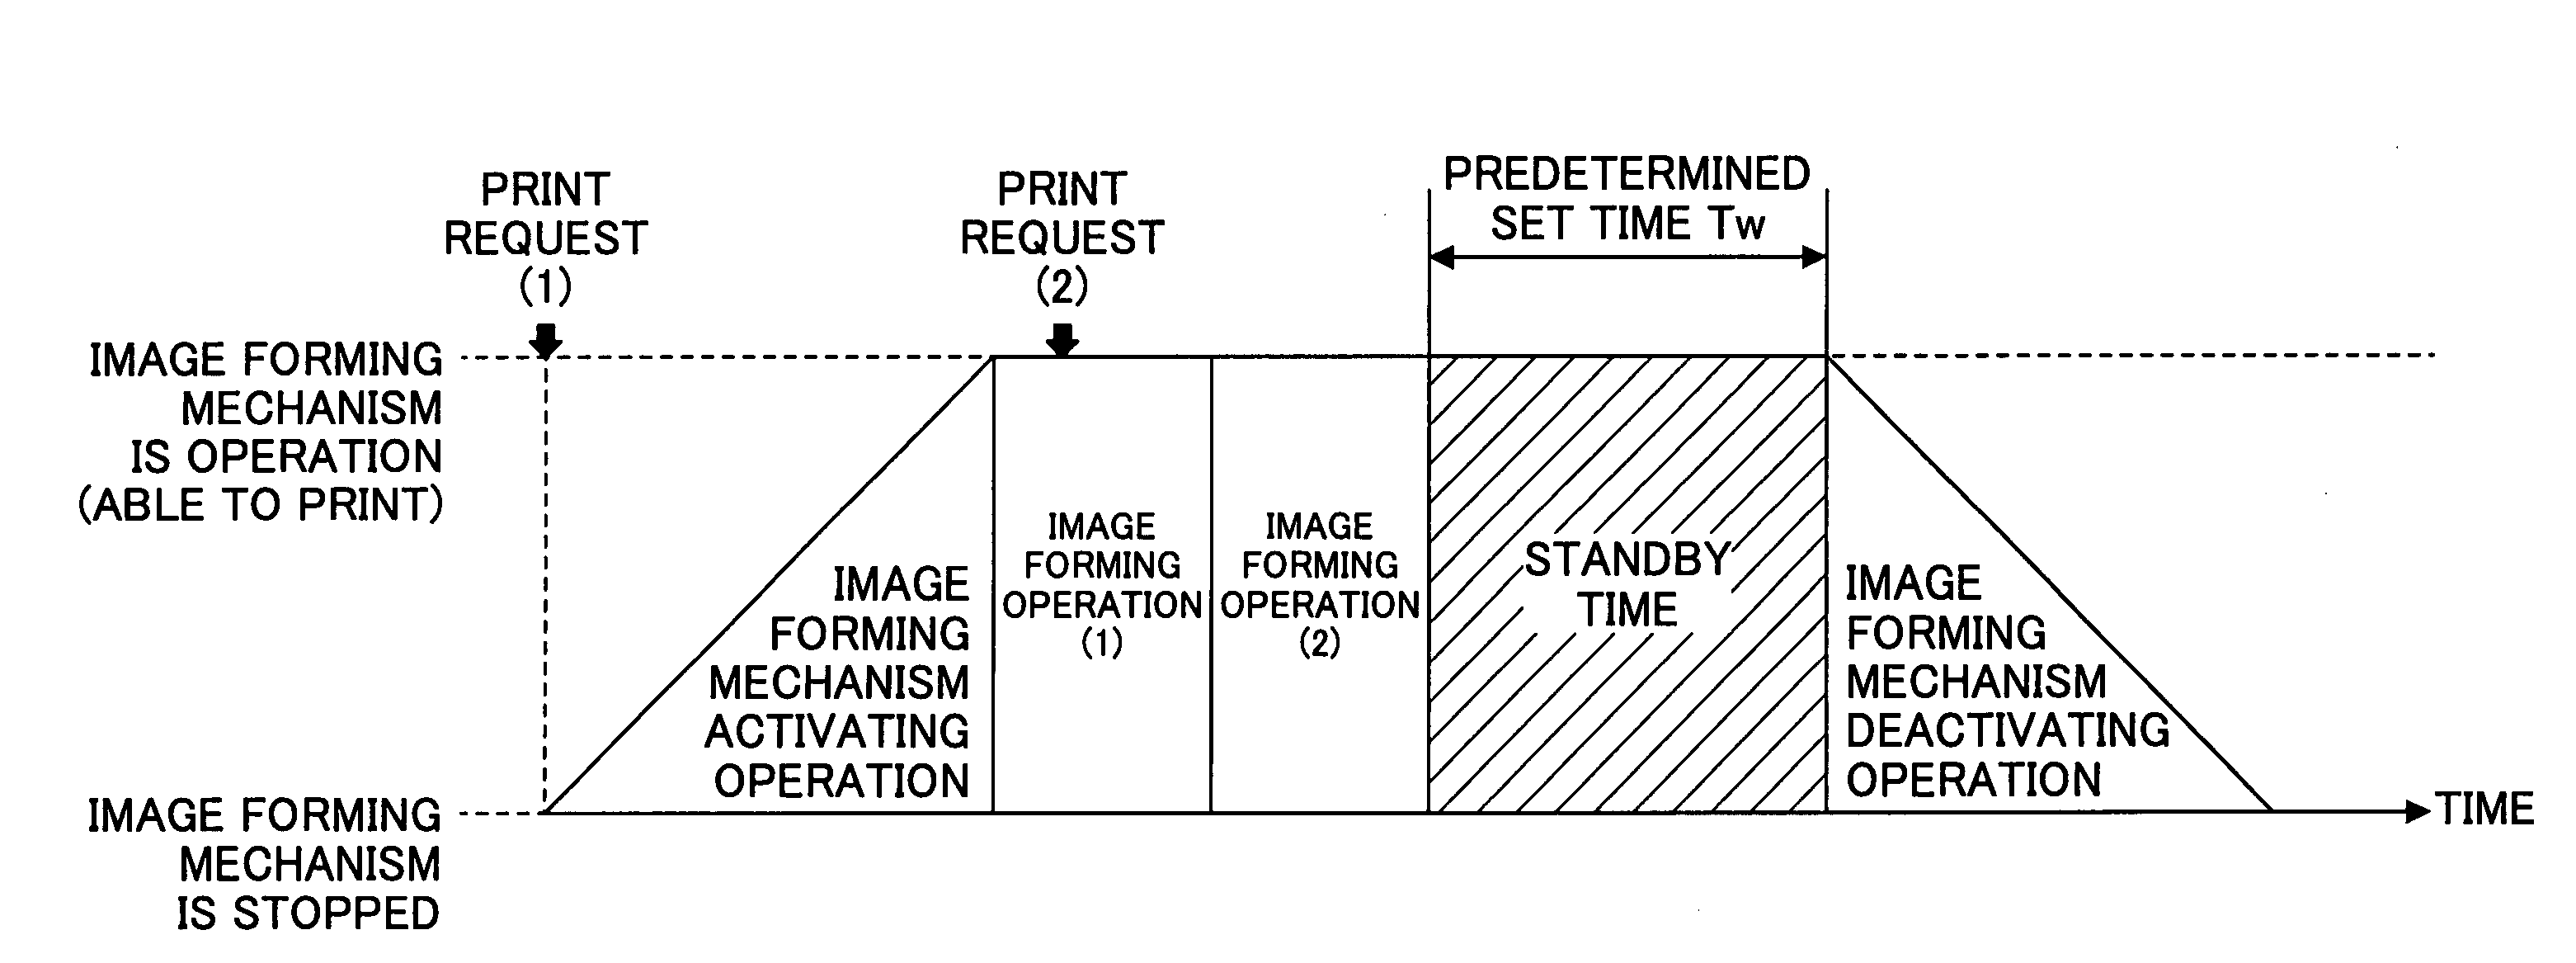 Image forming apparatus having an image forming part that can be set in a standby state in response to image forming operation to be performed subsequently